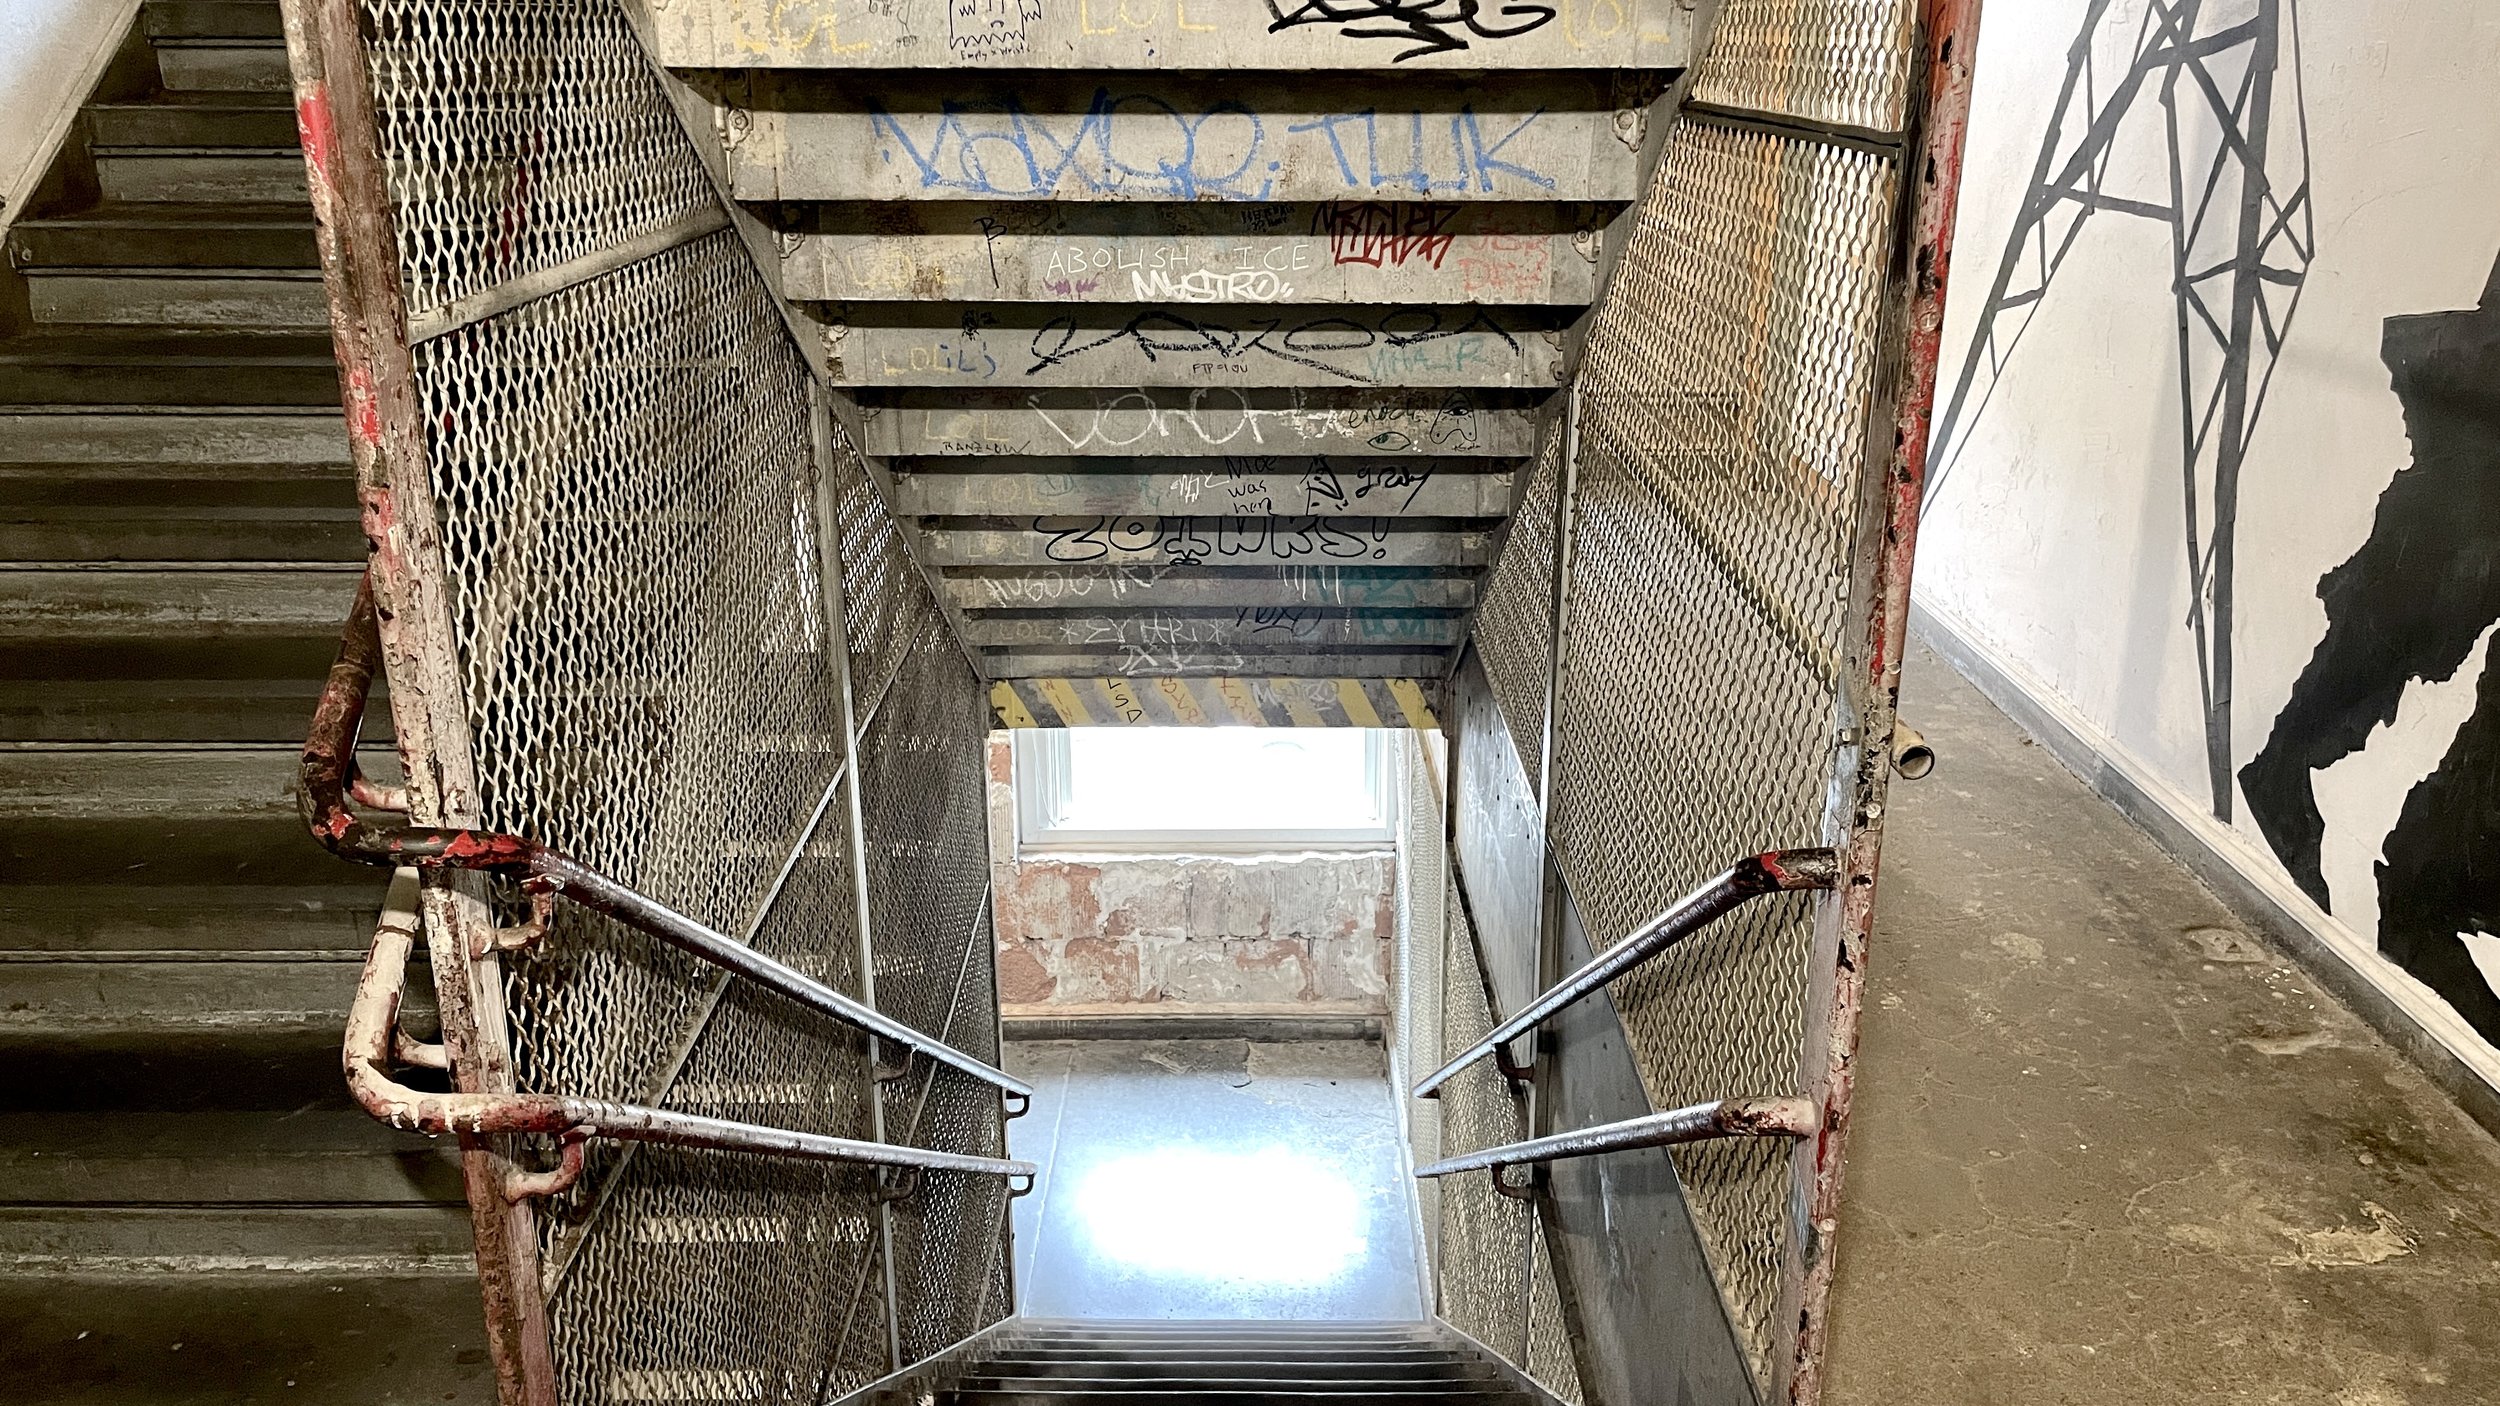 A stairwell littered with graffiti, indicative of the underground spirit of New York. (Copy)